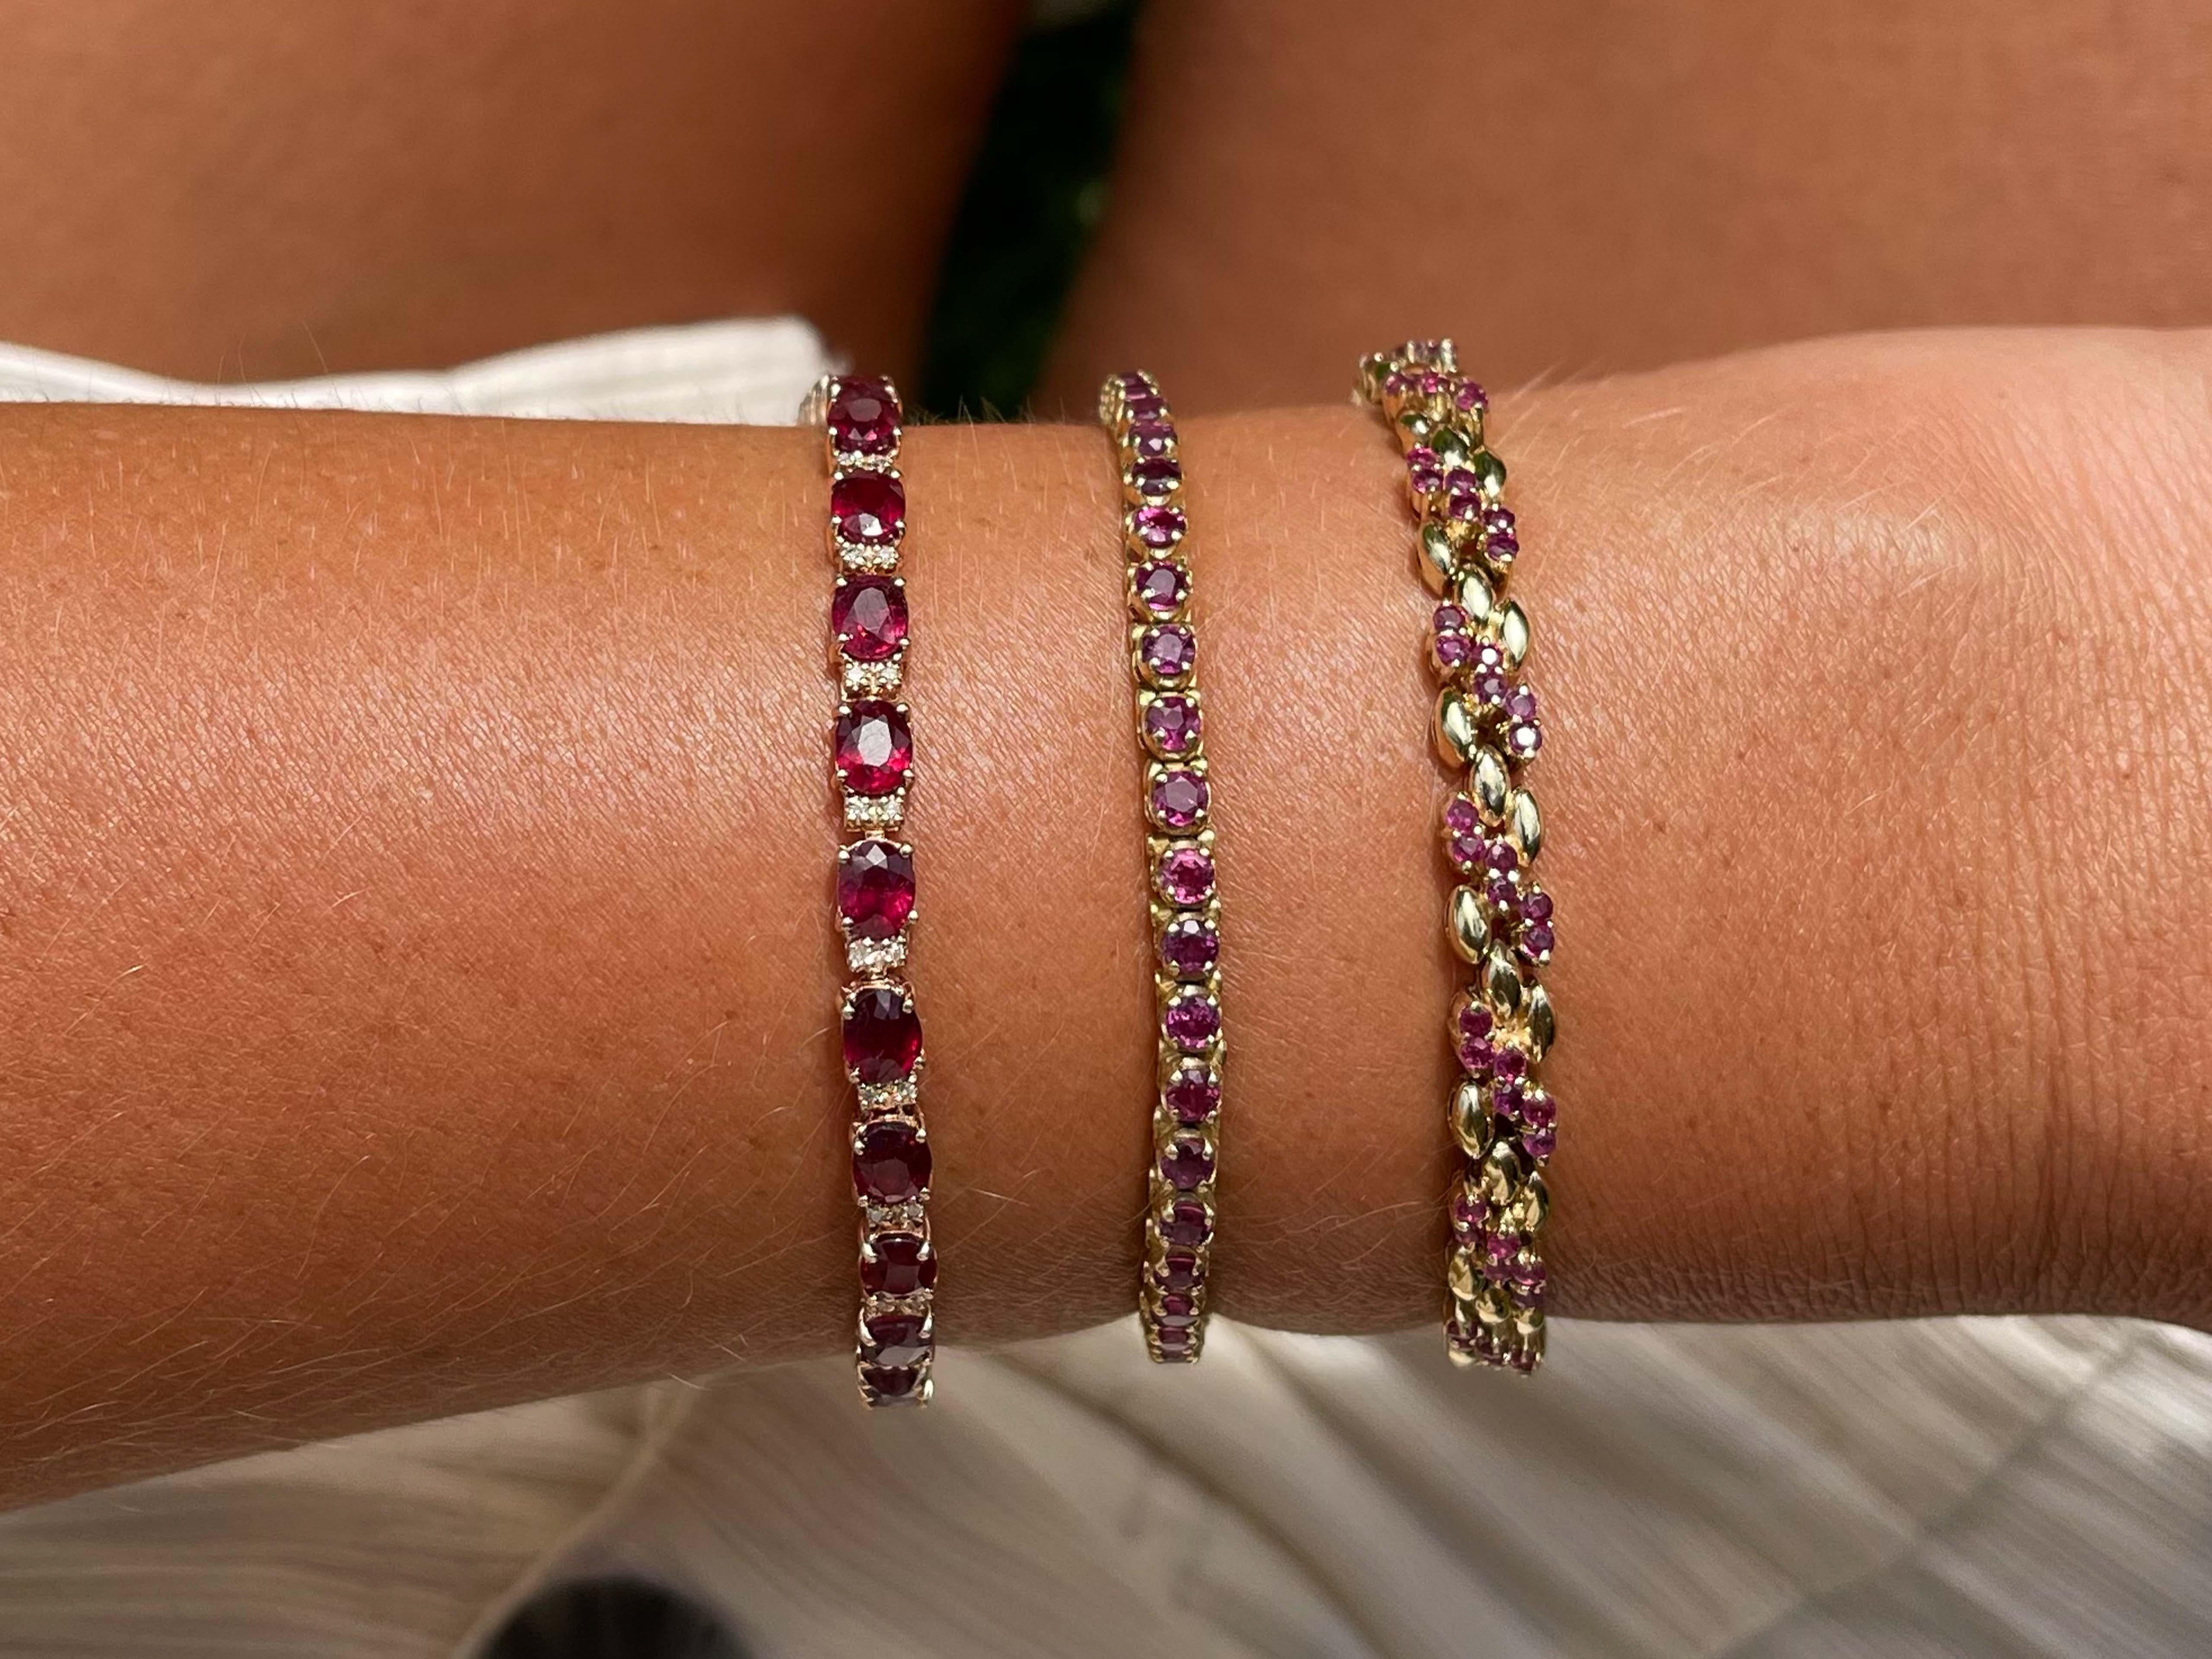 Bracelet Specifications:

Metal: 14k Rose Gold

Gemstones: red rubies 

Red Ruby Carat Weight: 11.5 carats

Red Ruby Count: 28
​
​Diamond Count: 54
​
​Diamond Carat Weight: 0.22
​
​Diamond Color: H
​
​Diamond Clarity: SI

Bracelet Length: ~7.75